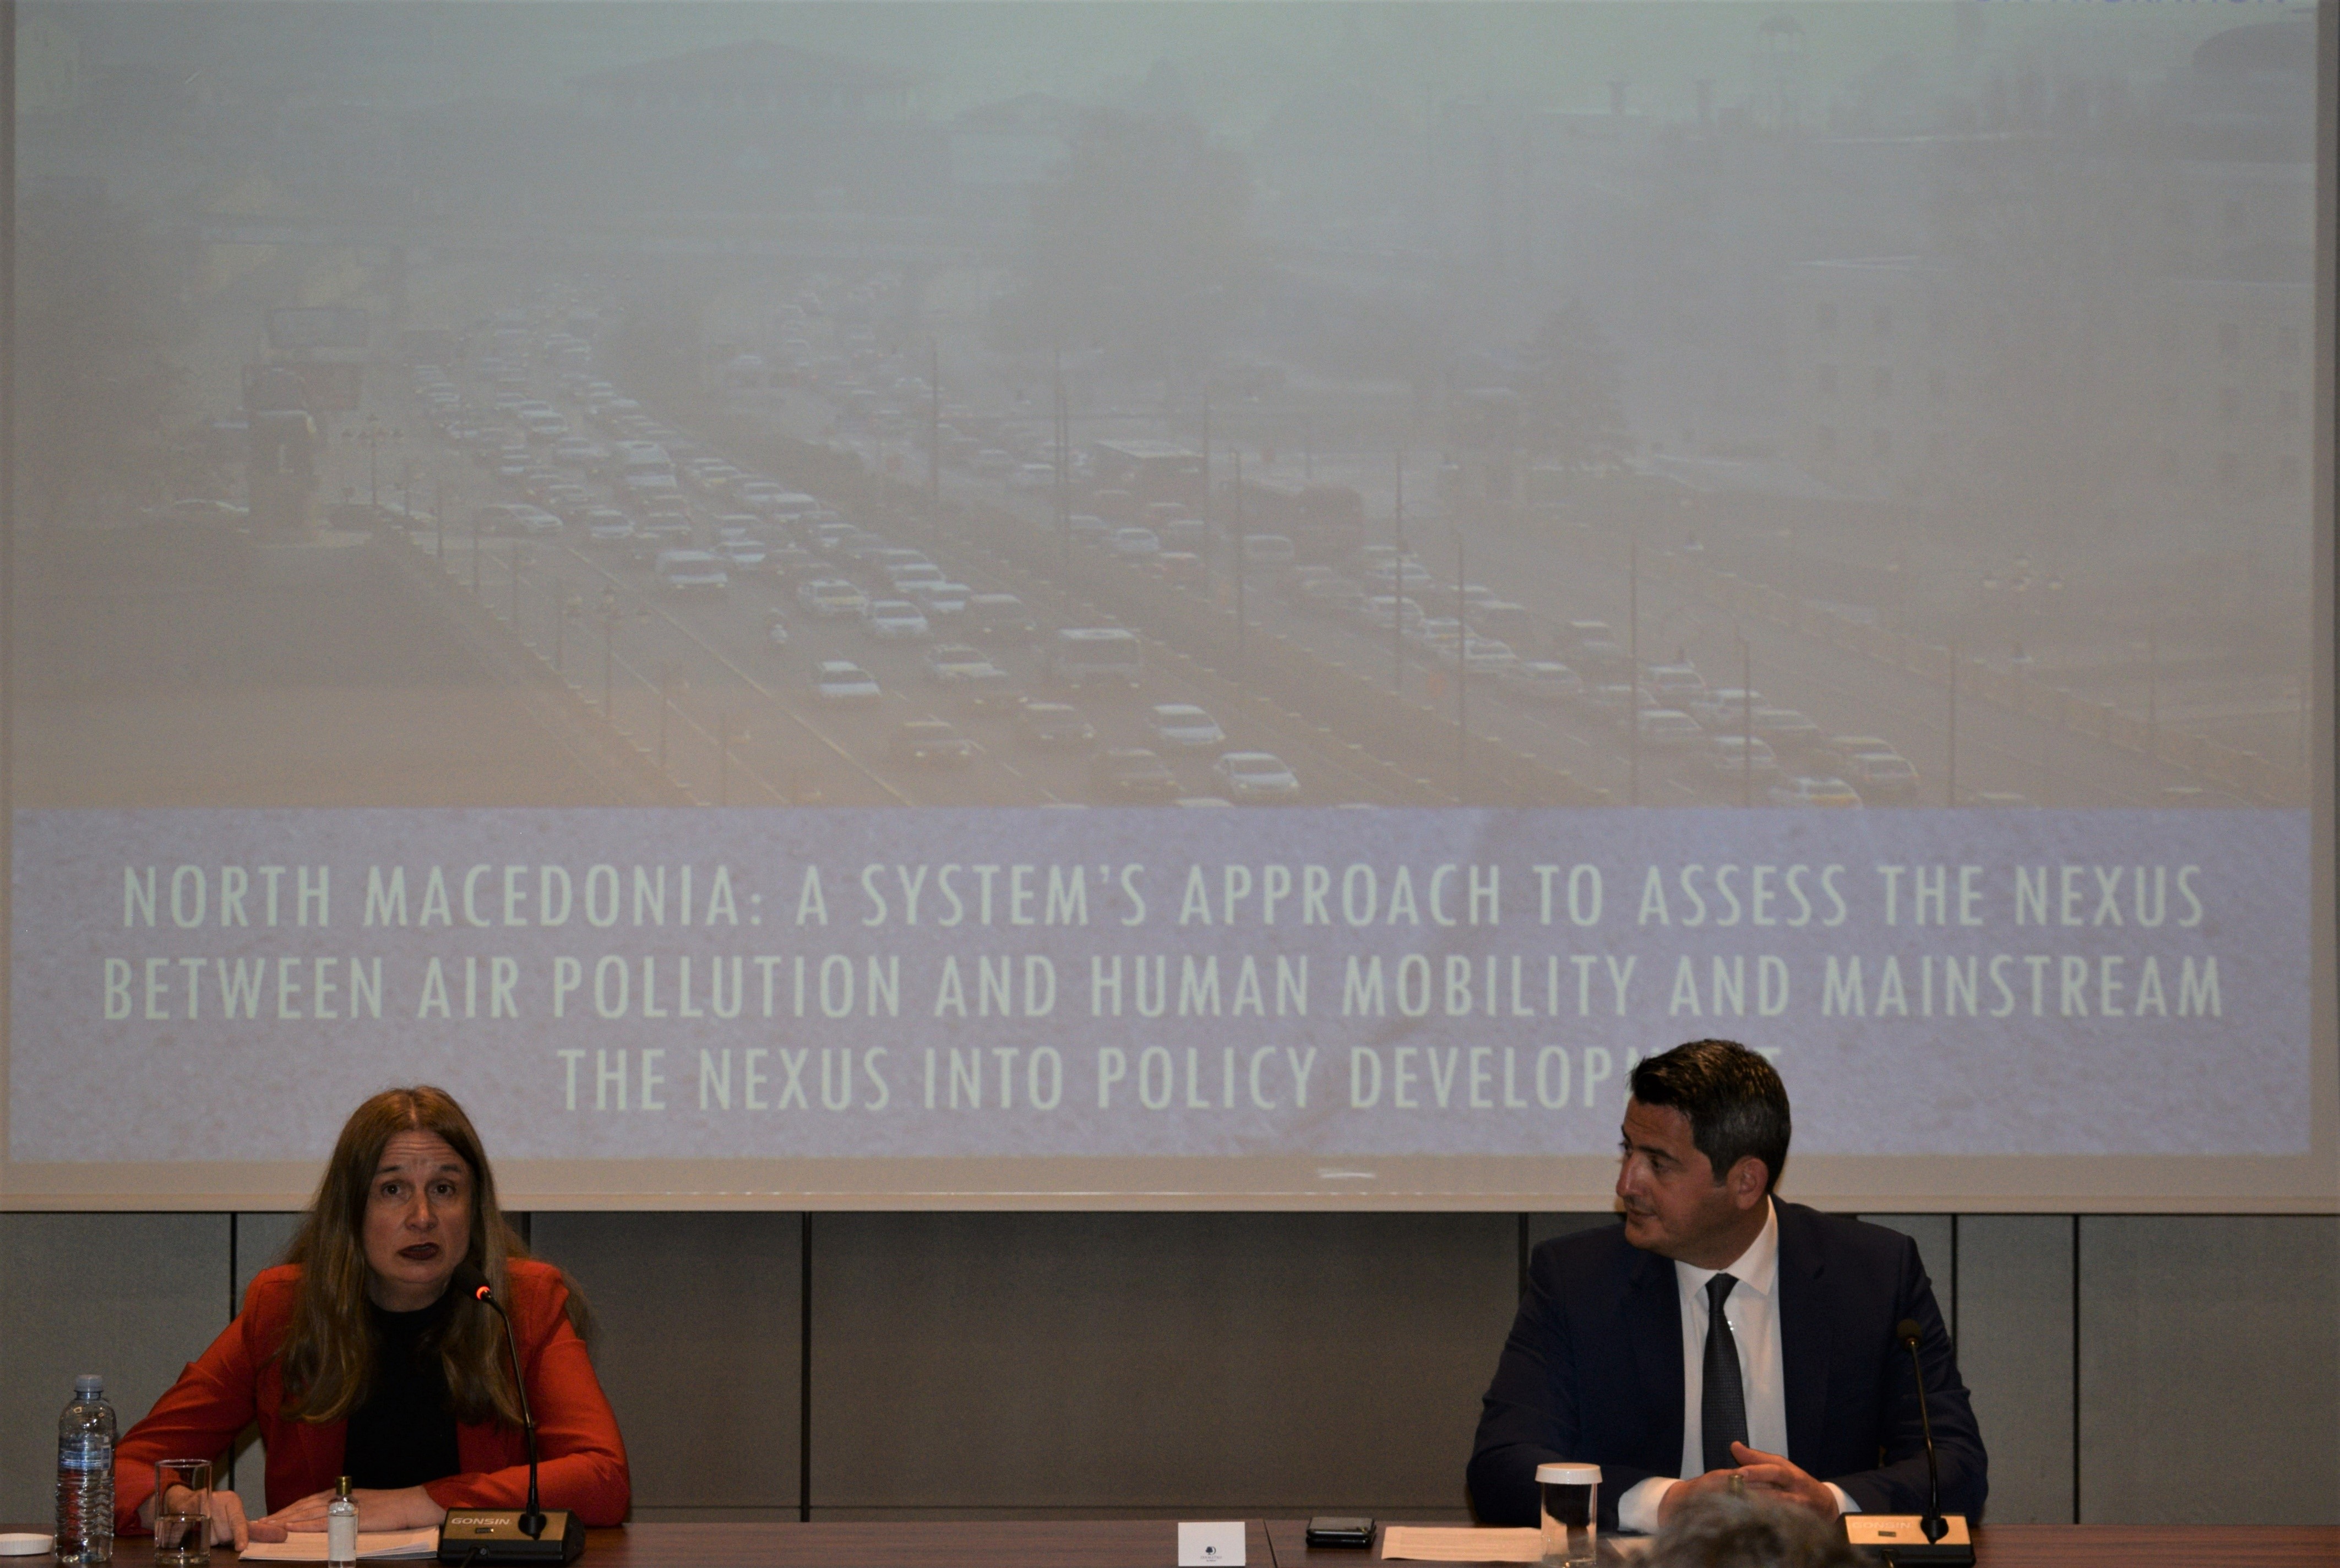 IOM NORTH MACEDONIA IS SUPPORTING GOVERNMENT’S PROGRAMME FOR REDUCING THE AIR POLLUTION AND ACHIEVEMENT OF THE 2030 AGENDA GOALS FOR SUSTAINABLE DEVELOPMENT